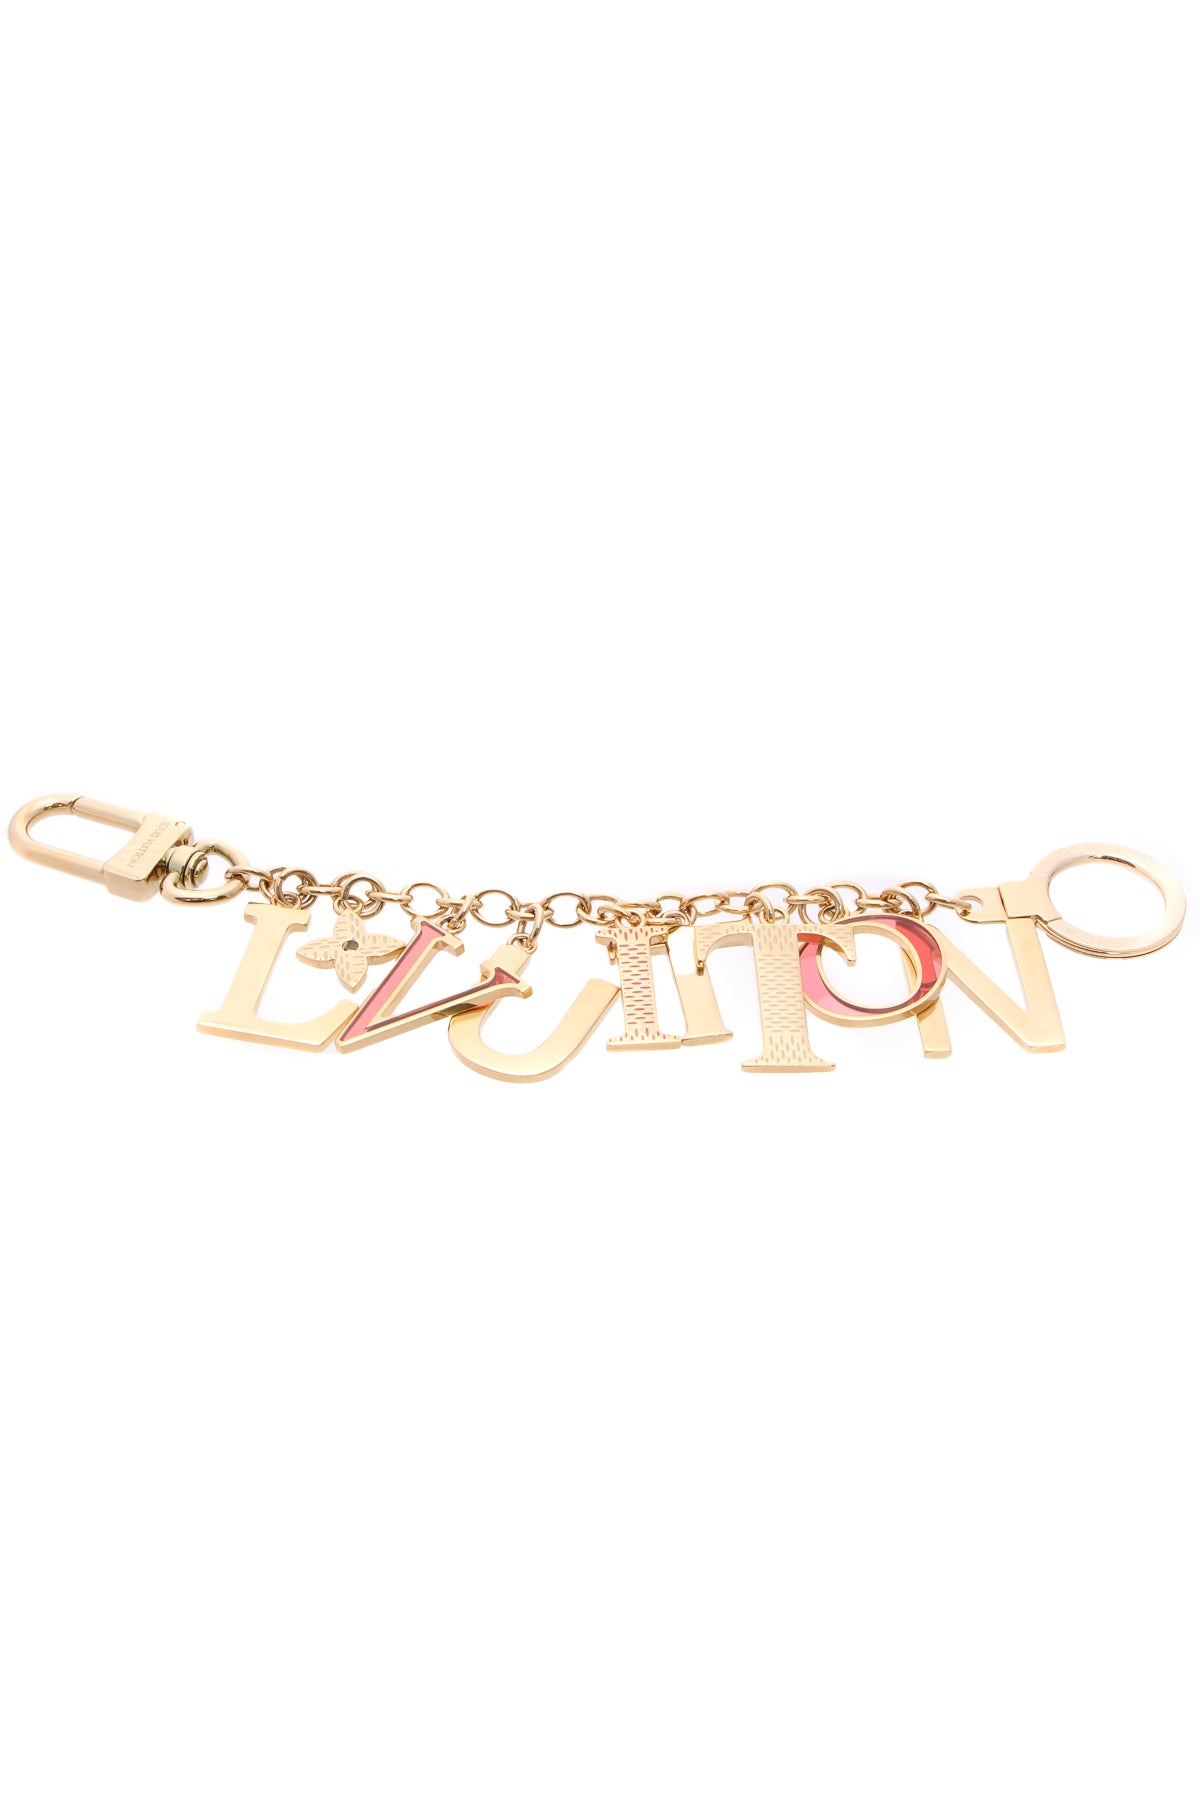 Louis Vuitton LV Logo Bracelet with Backpack Charm